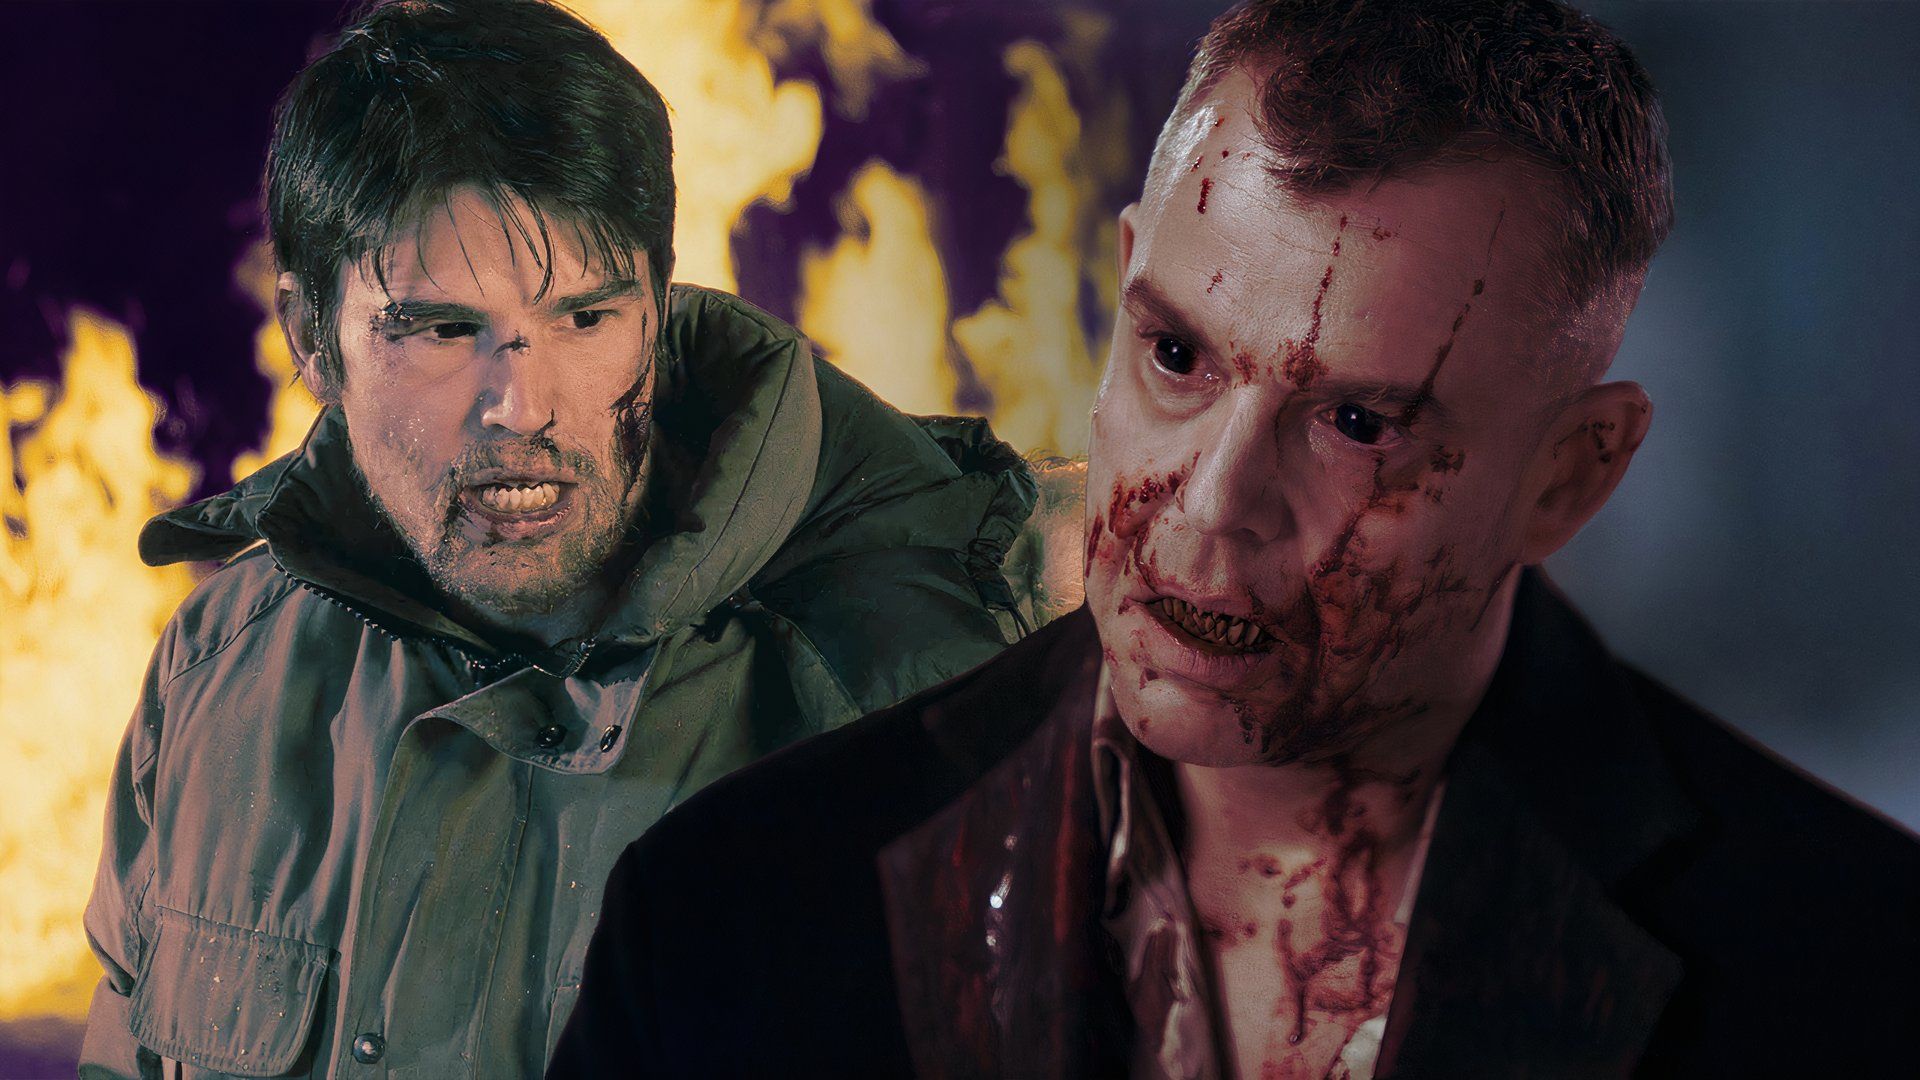 An edited image of Josh Hartnett and Danny Huston as vampires with sharp teeth and blood on their face in 30 Days of Night